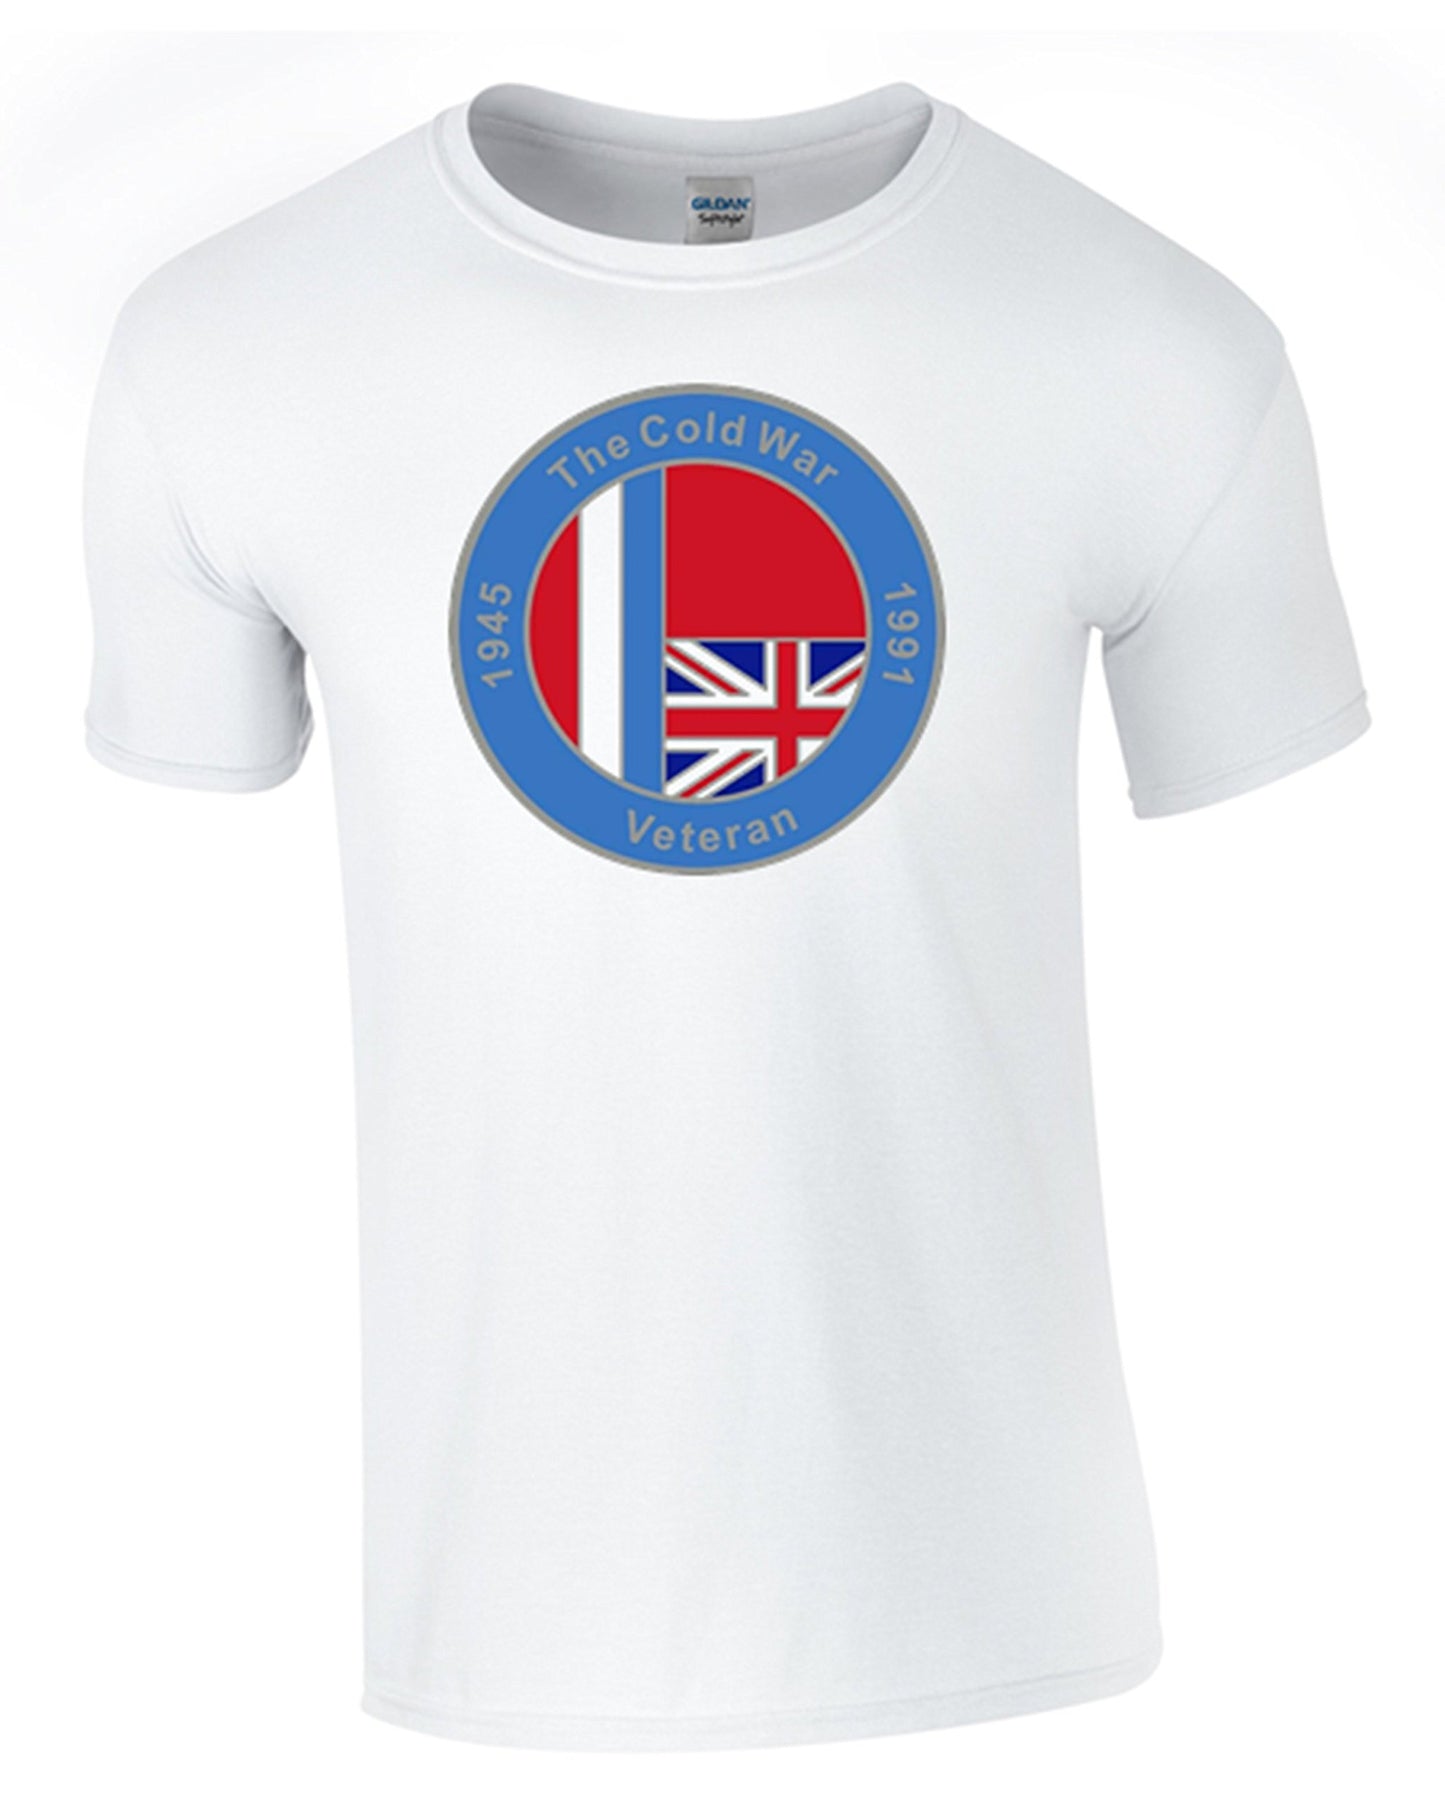 Bear Essentials Clothing. Cold War Op Banner T/Shirt (S, White) - Army 1157 kit Army 1157 Kit